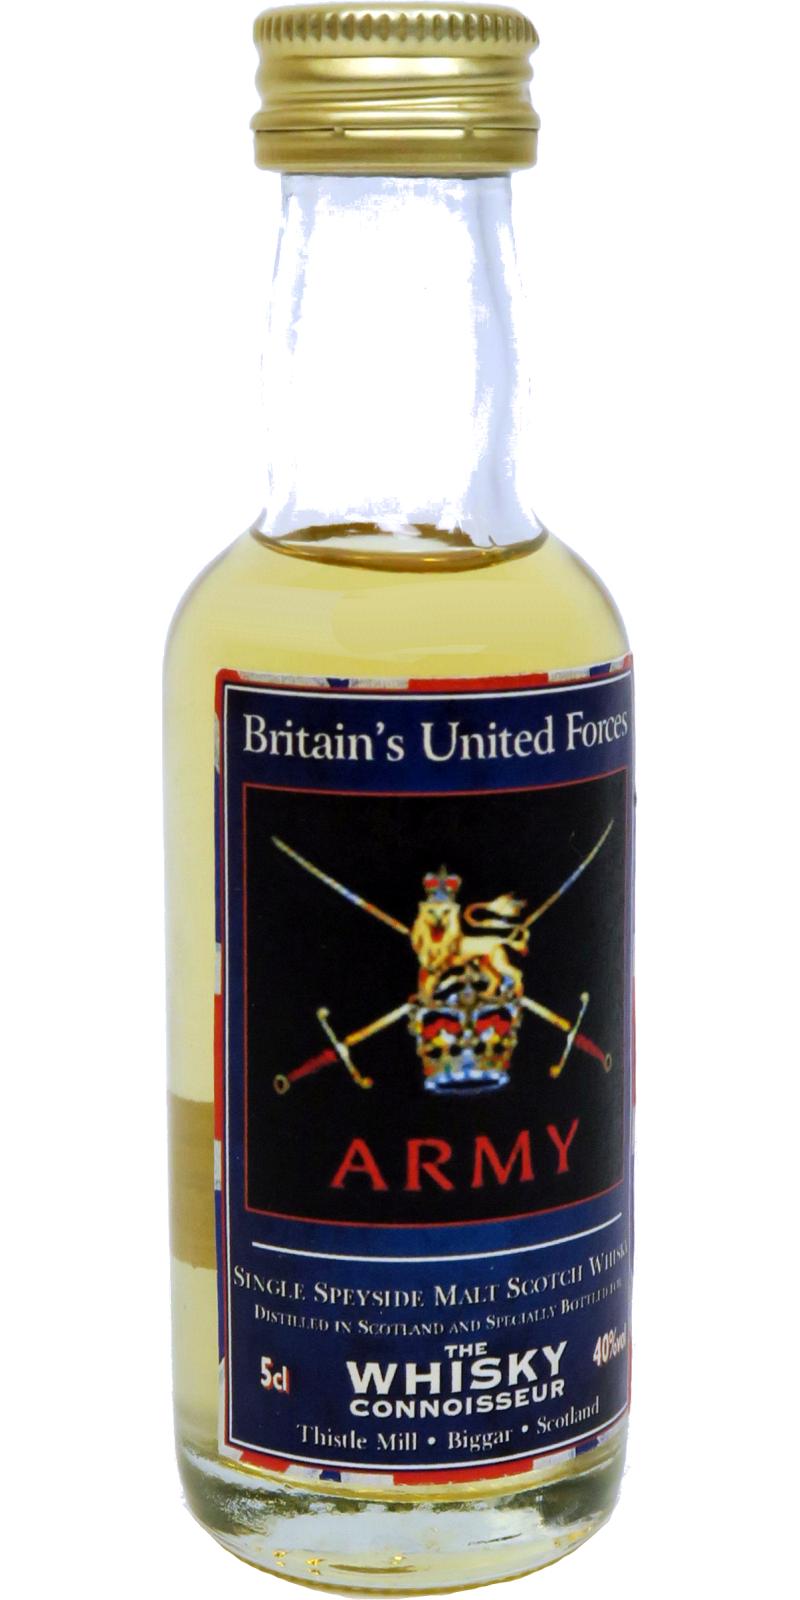 Britain's United Forces Army